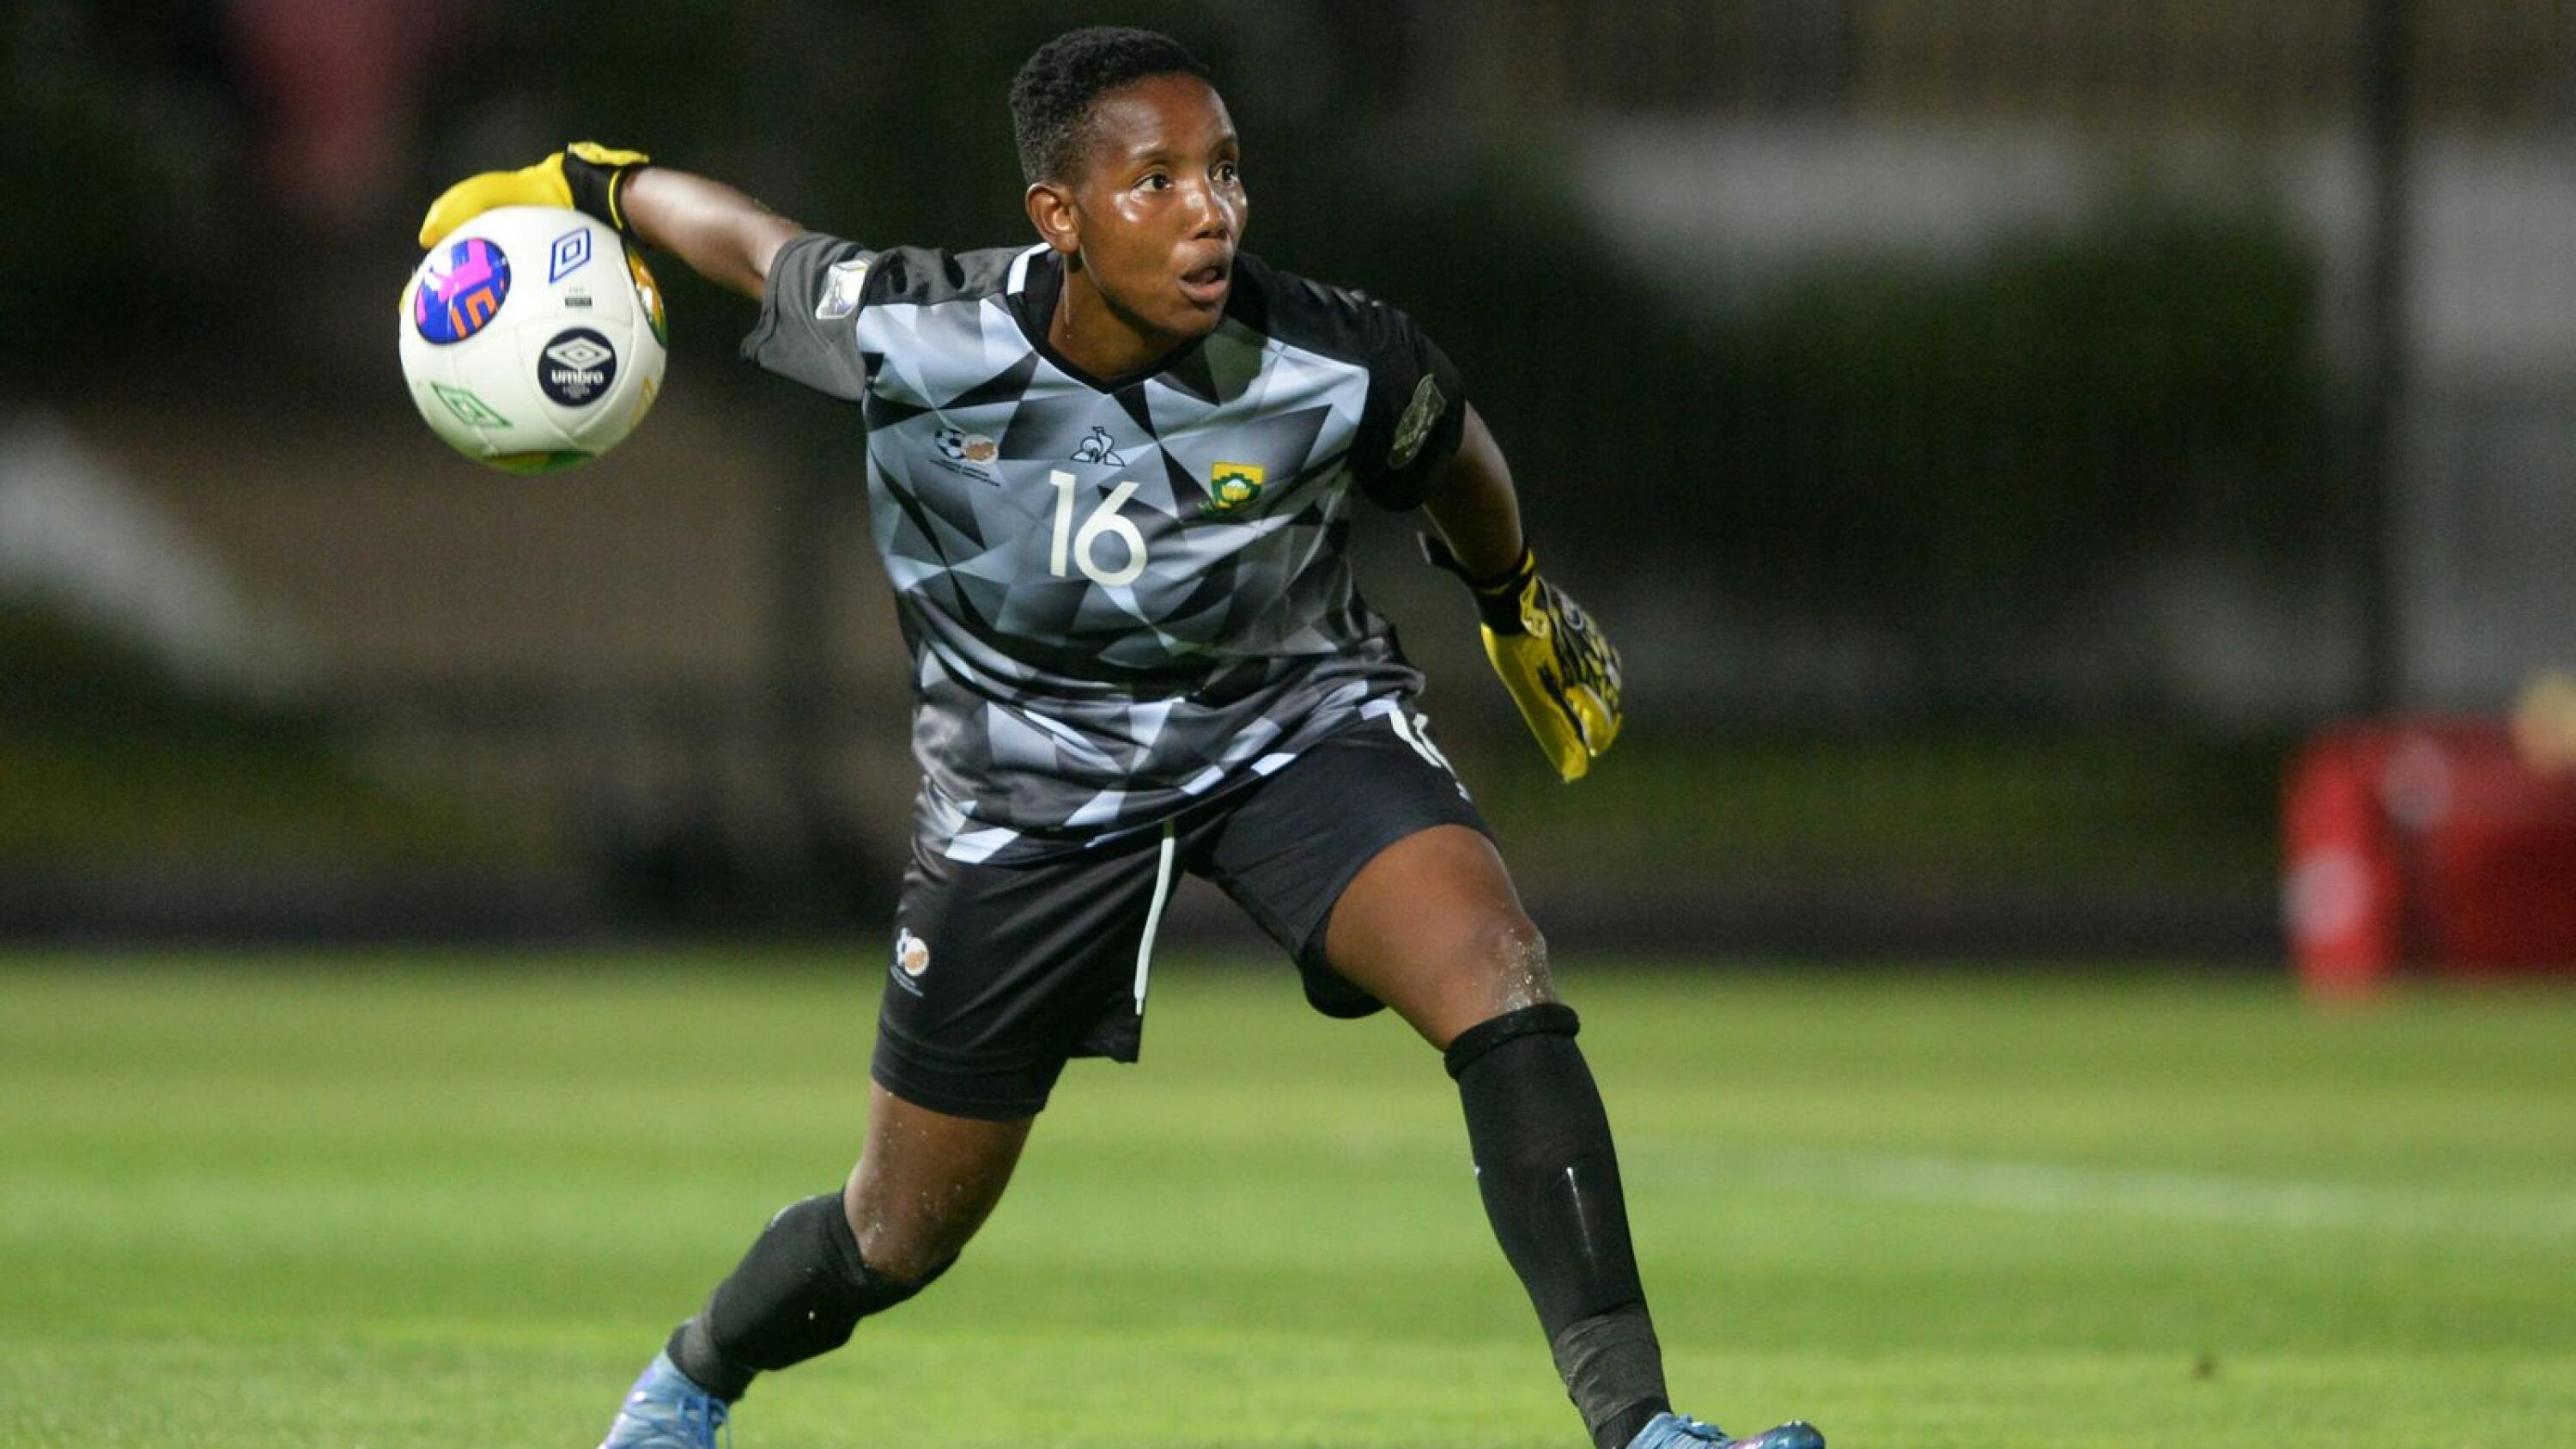 South Africa goalkeeper Andile Dlamini during the 2022 Women’s Africa Cup of Nations quarter-final game against Tunisia at Stade Prince Moulay Al Hassan in Rabat